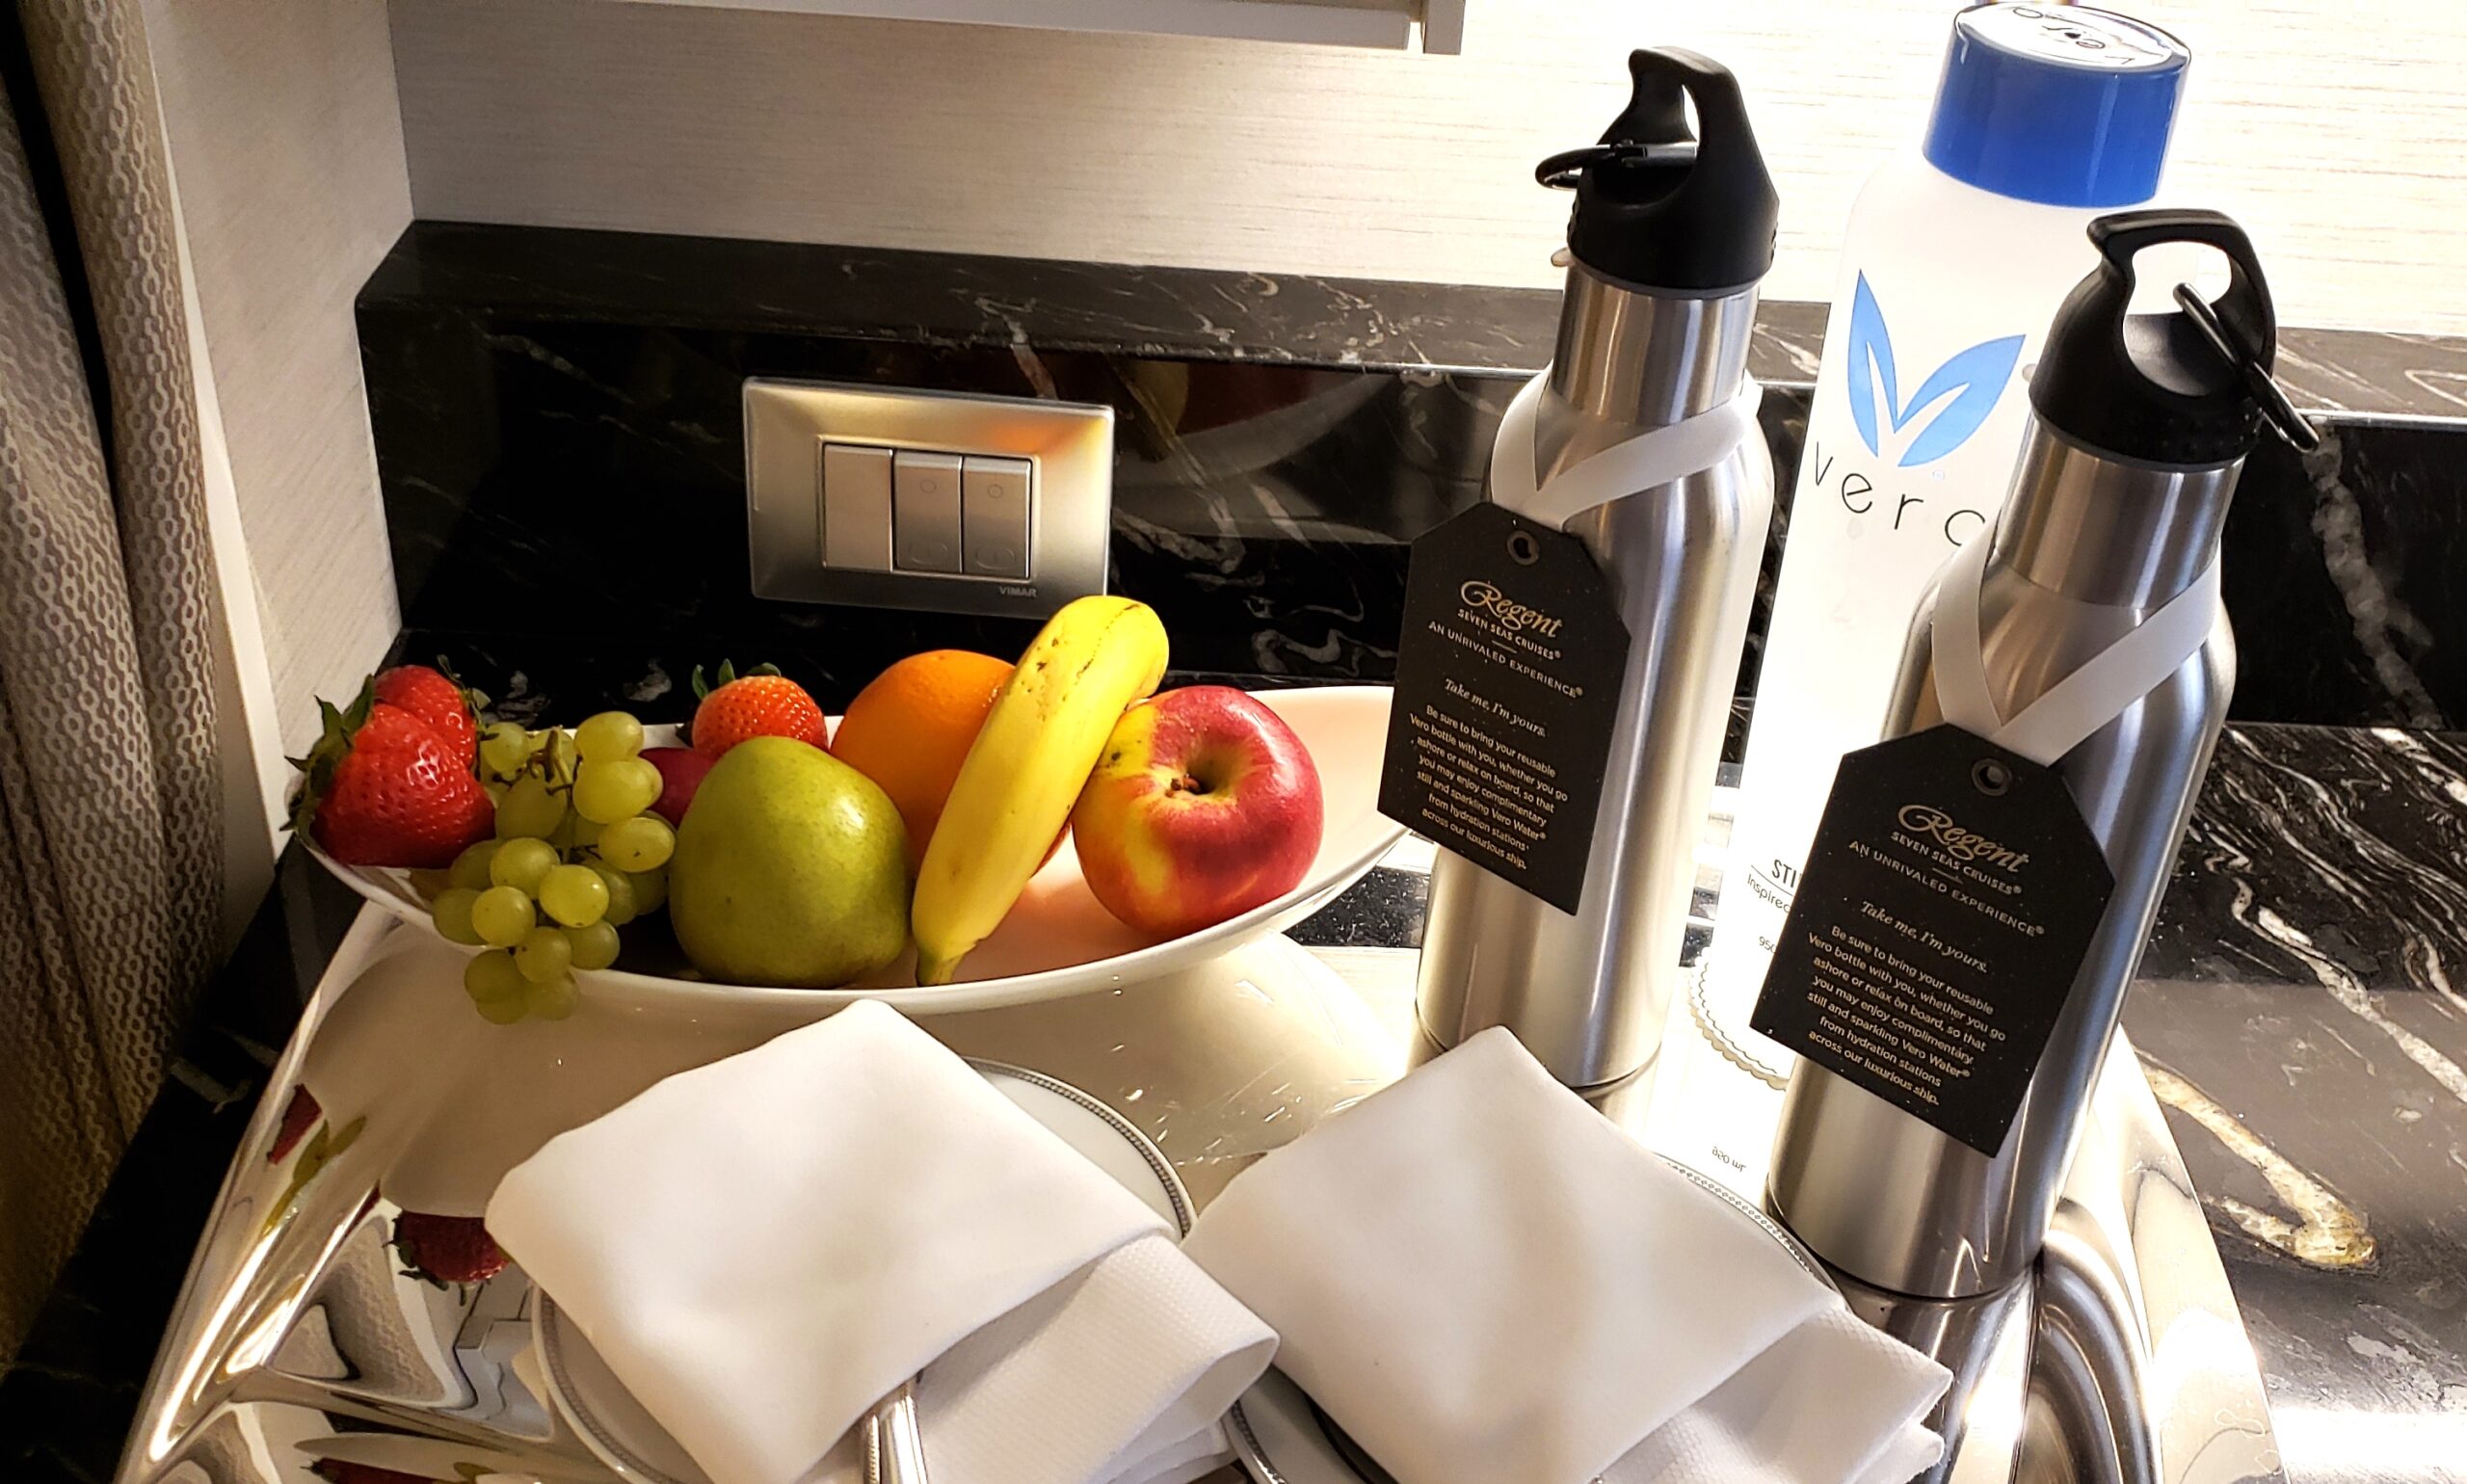 One key step to stay fit on a cruise is to hydrate well and carry a reusable water bottle, often provided by the line. For example, here is fruit and two water bottles provided for guests on Regent Seven Seas Cruises' Seven Seas Splendor. Photo by Susan J. Young.